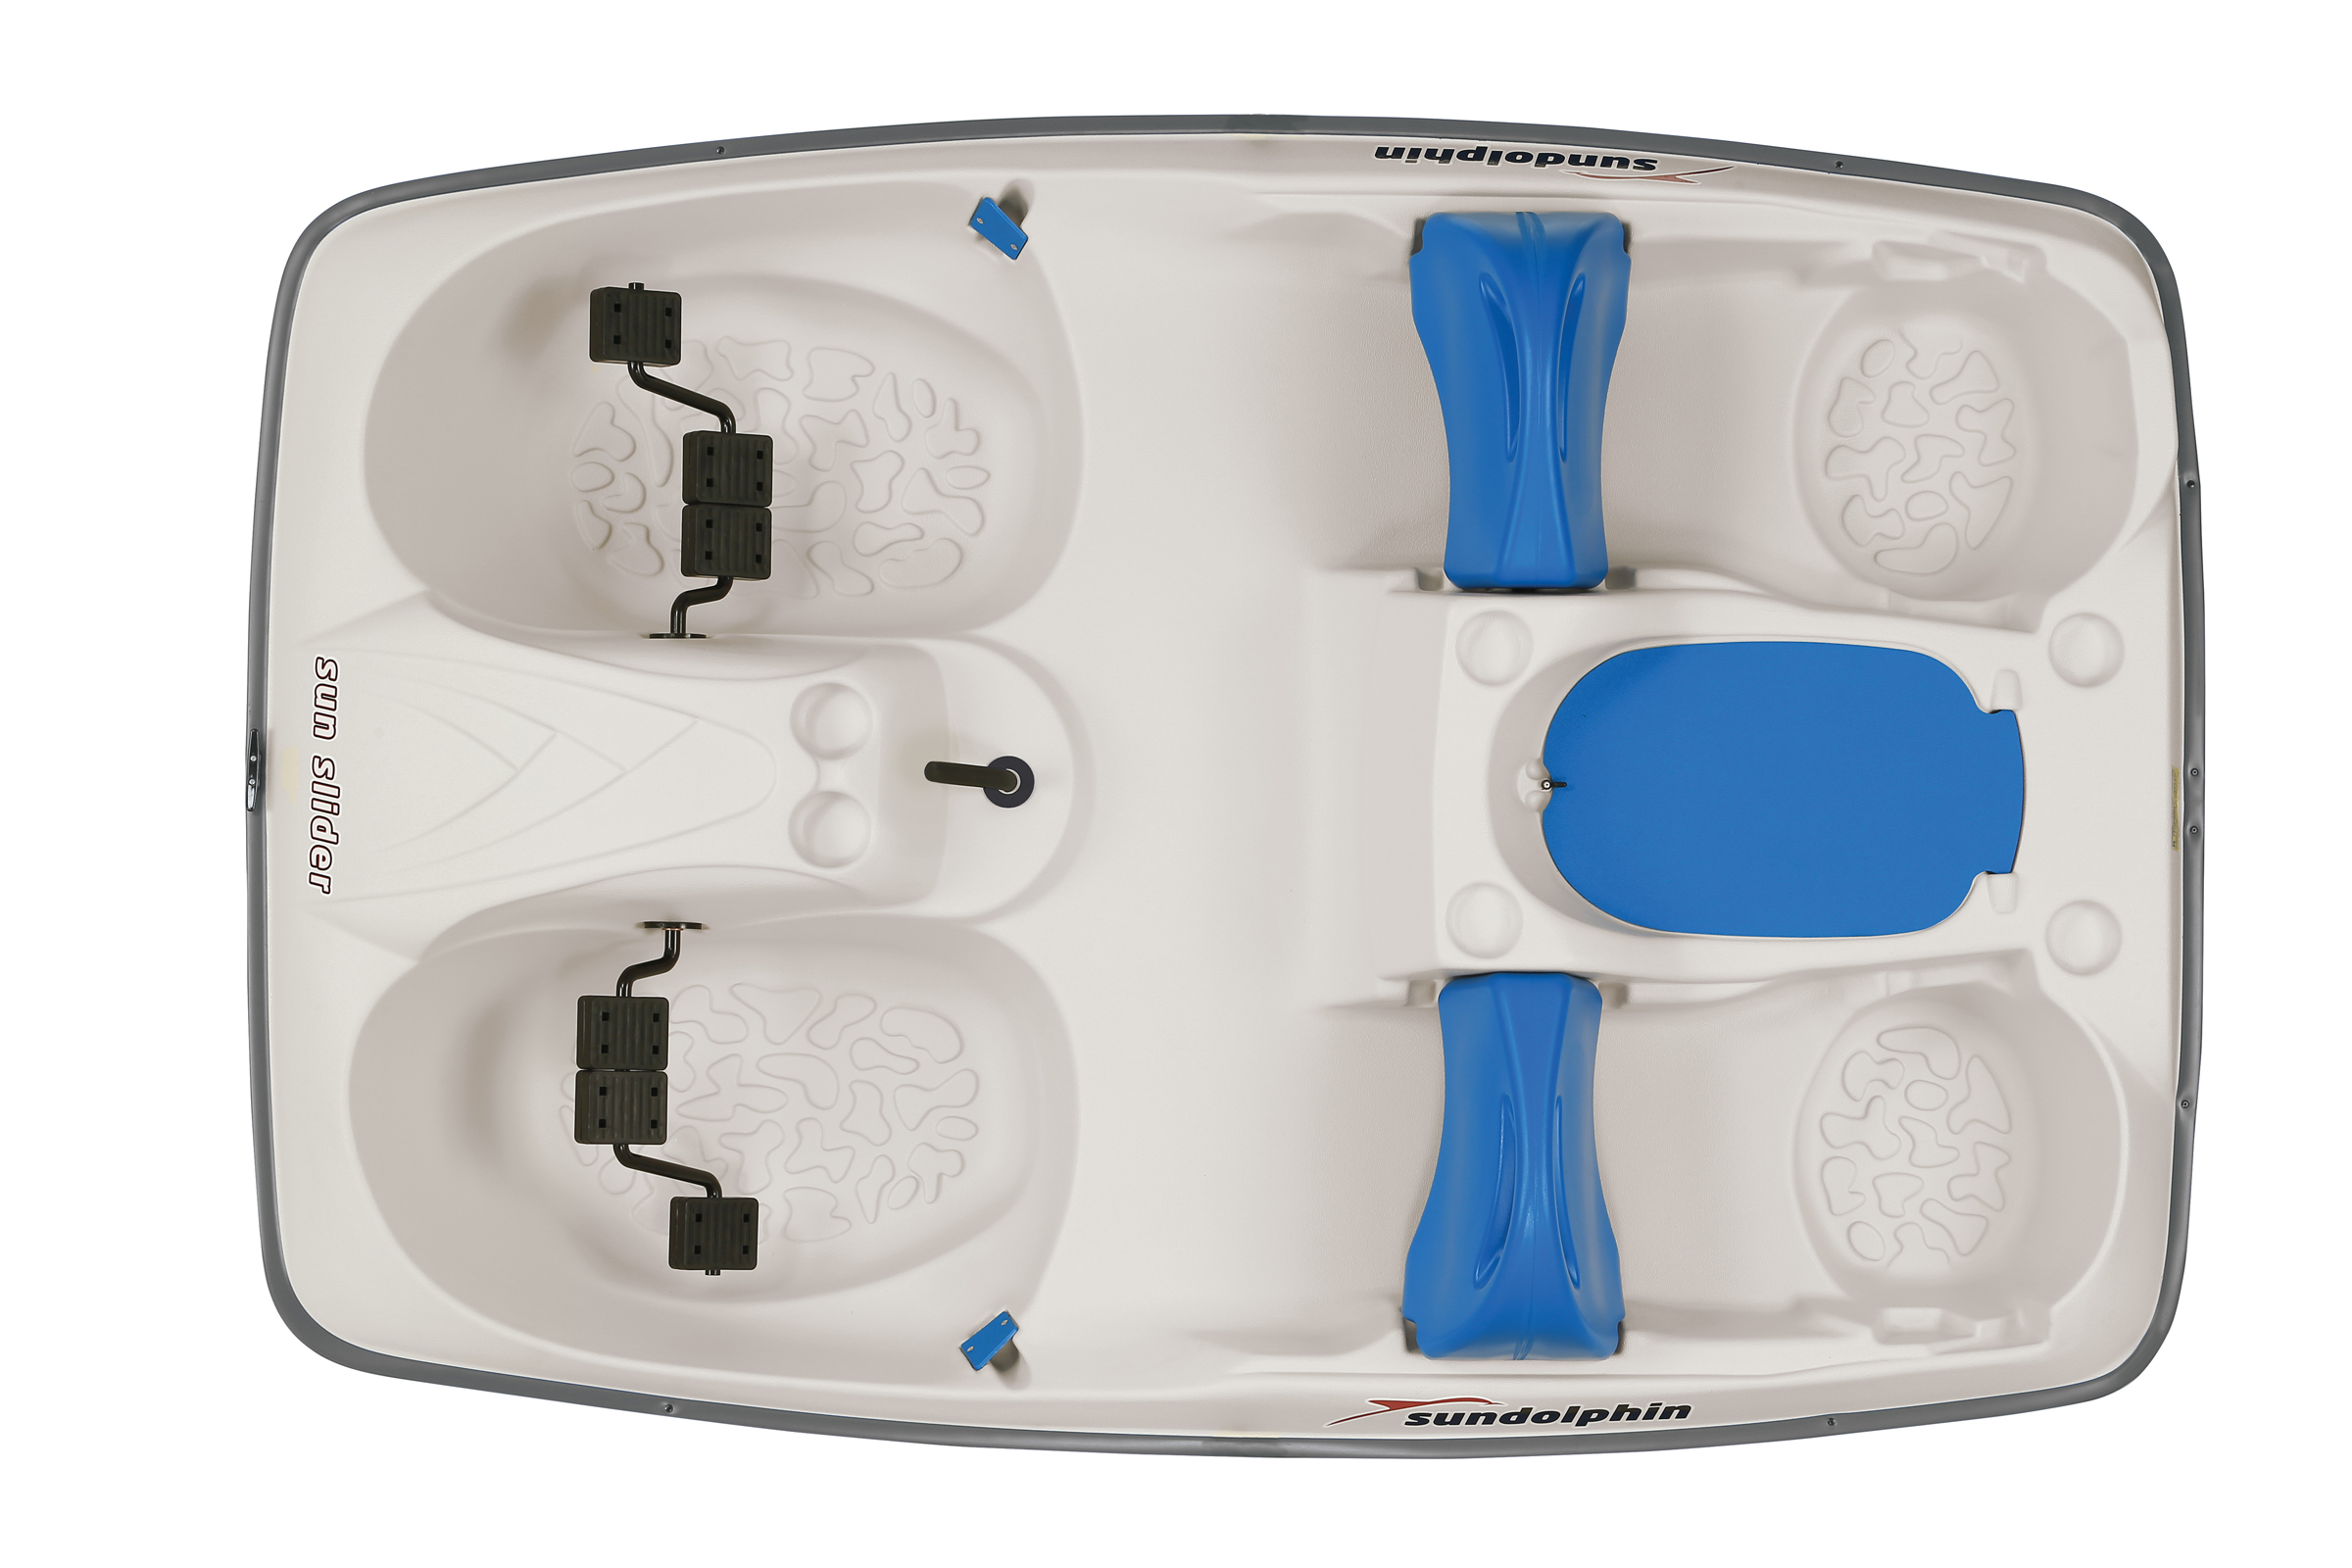 Sun Dolphin 5 Seat Sun Slider Pedal Boat with Canopy, Blue - image 2 of 6